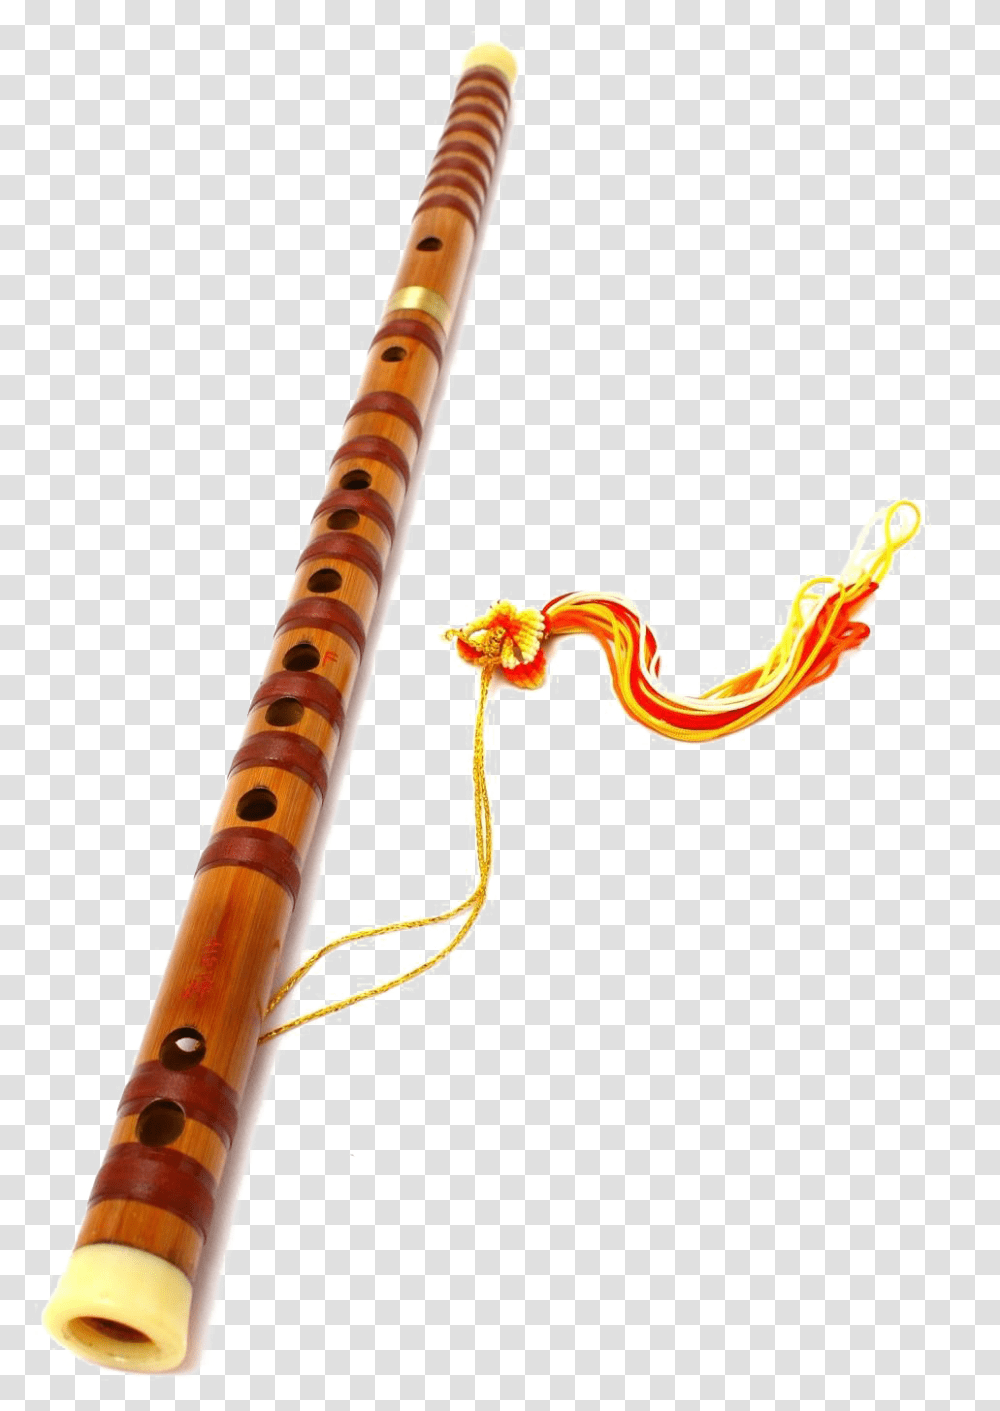 Flute Image File Chinese Bamboo Flute, Leisure Activities, Musical Instrument Transparent Png